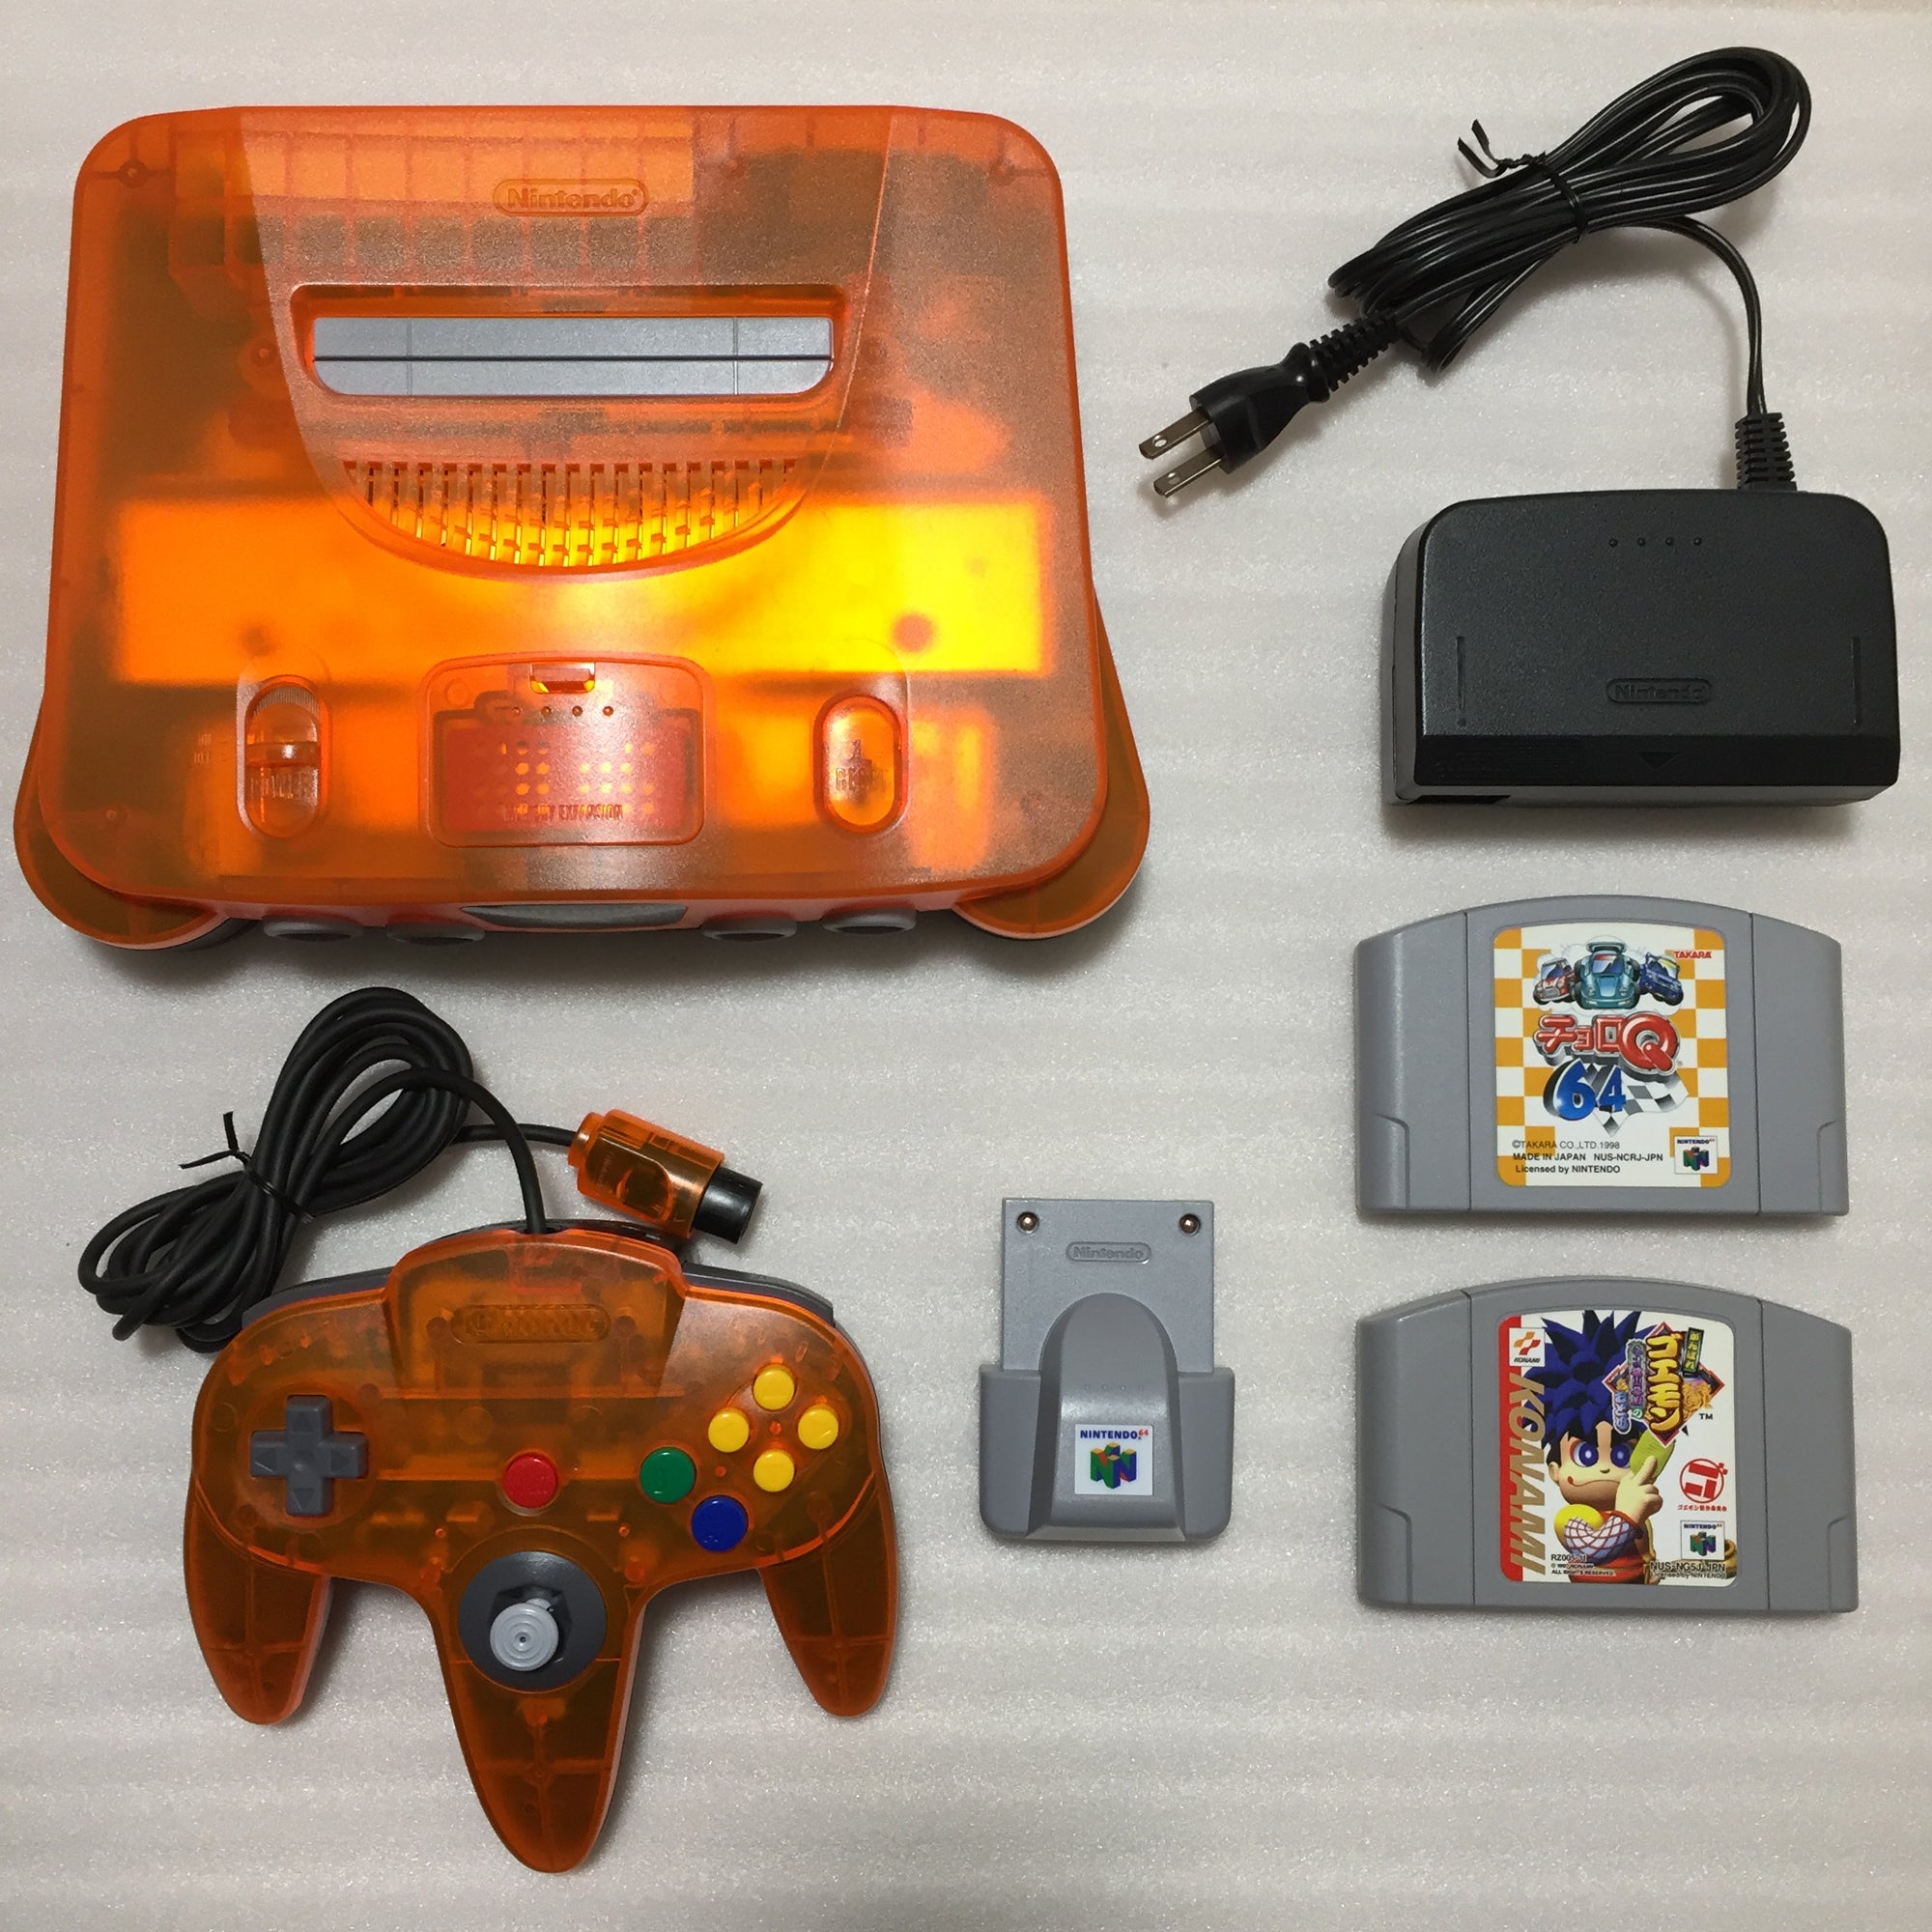 Daiei Hawks Nintendo 64 set with ULTRA HDMI kit - compatible with JP and US games